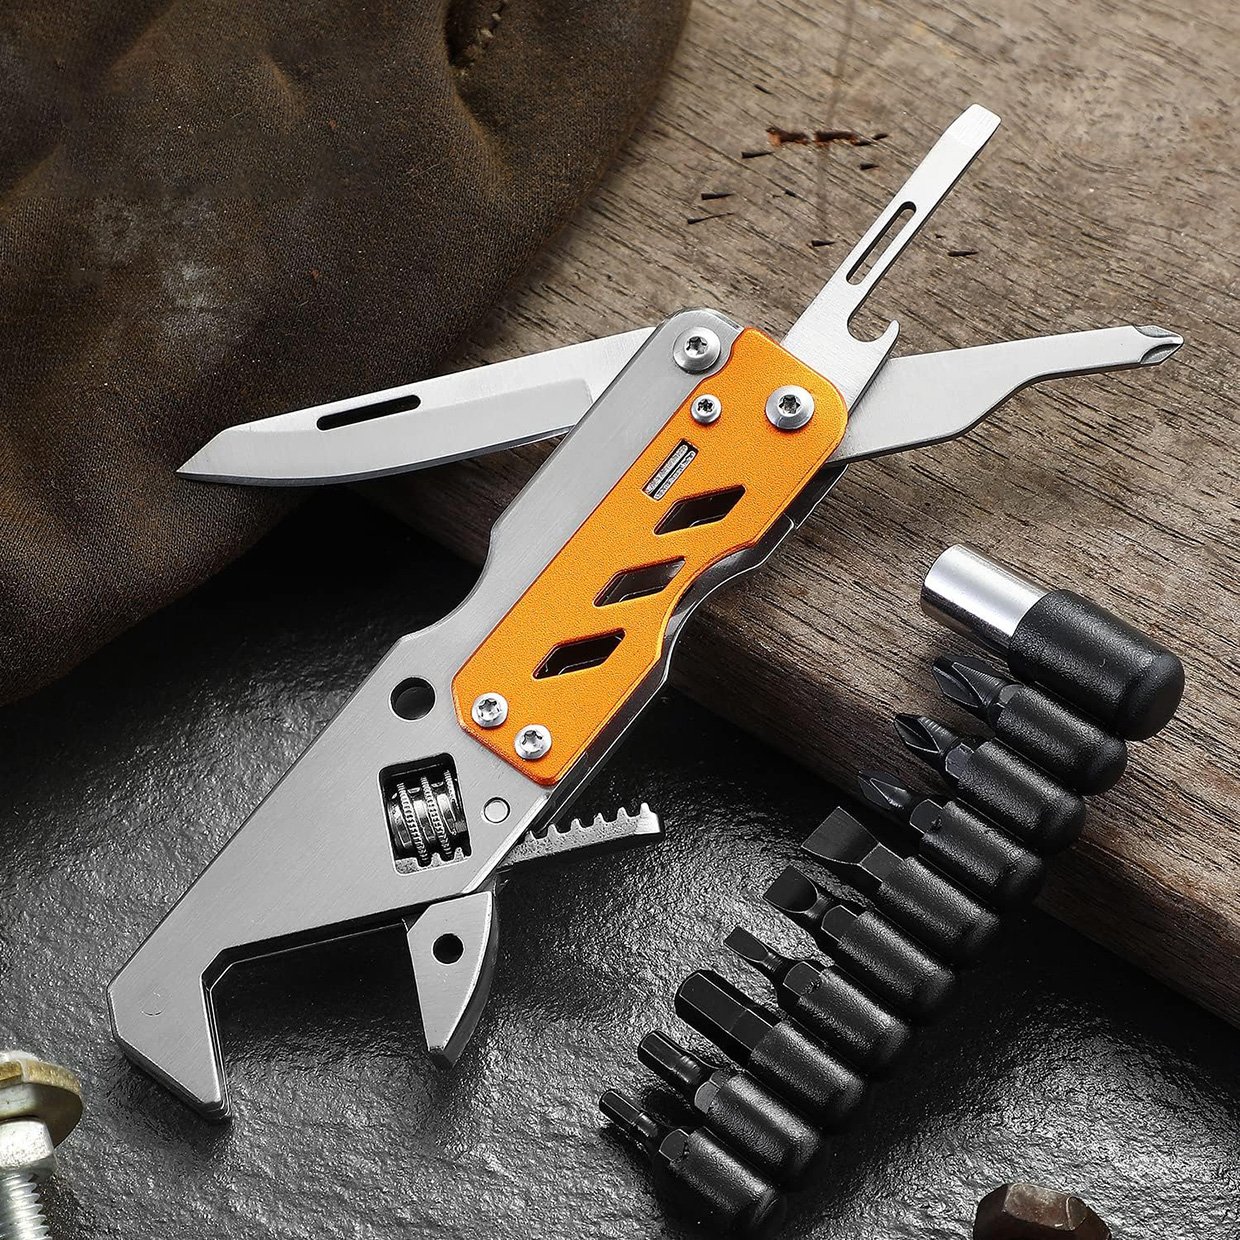 Outu 6-in-1 Pocket Multitool Wrench